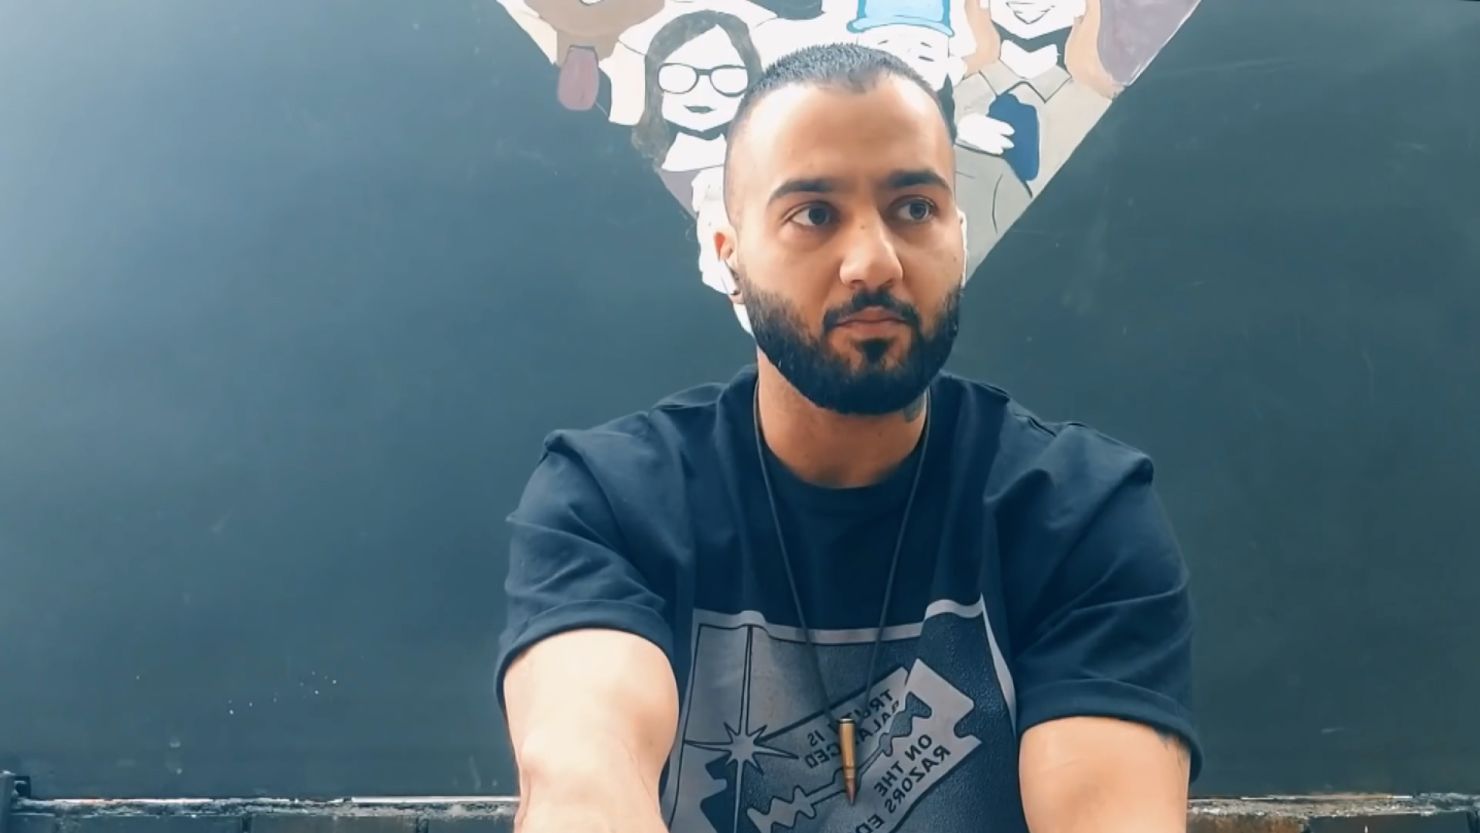 Iranian dissident rapper Toomaj Salehi has previously been detained on charges related to supporting the widespread protest movement in Iran last year